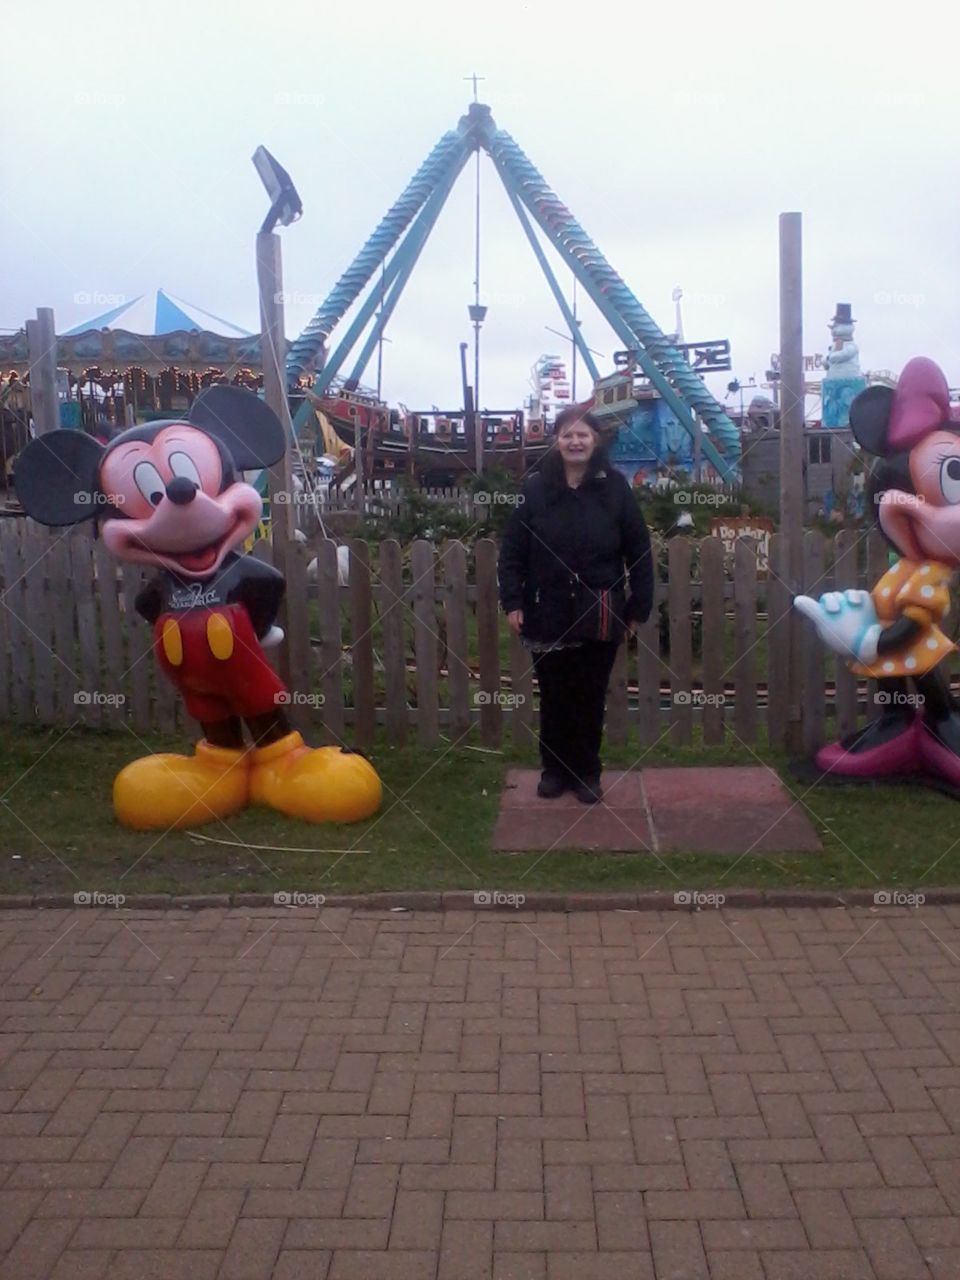 Between Mickey mouse and Minni Mouse